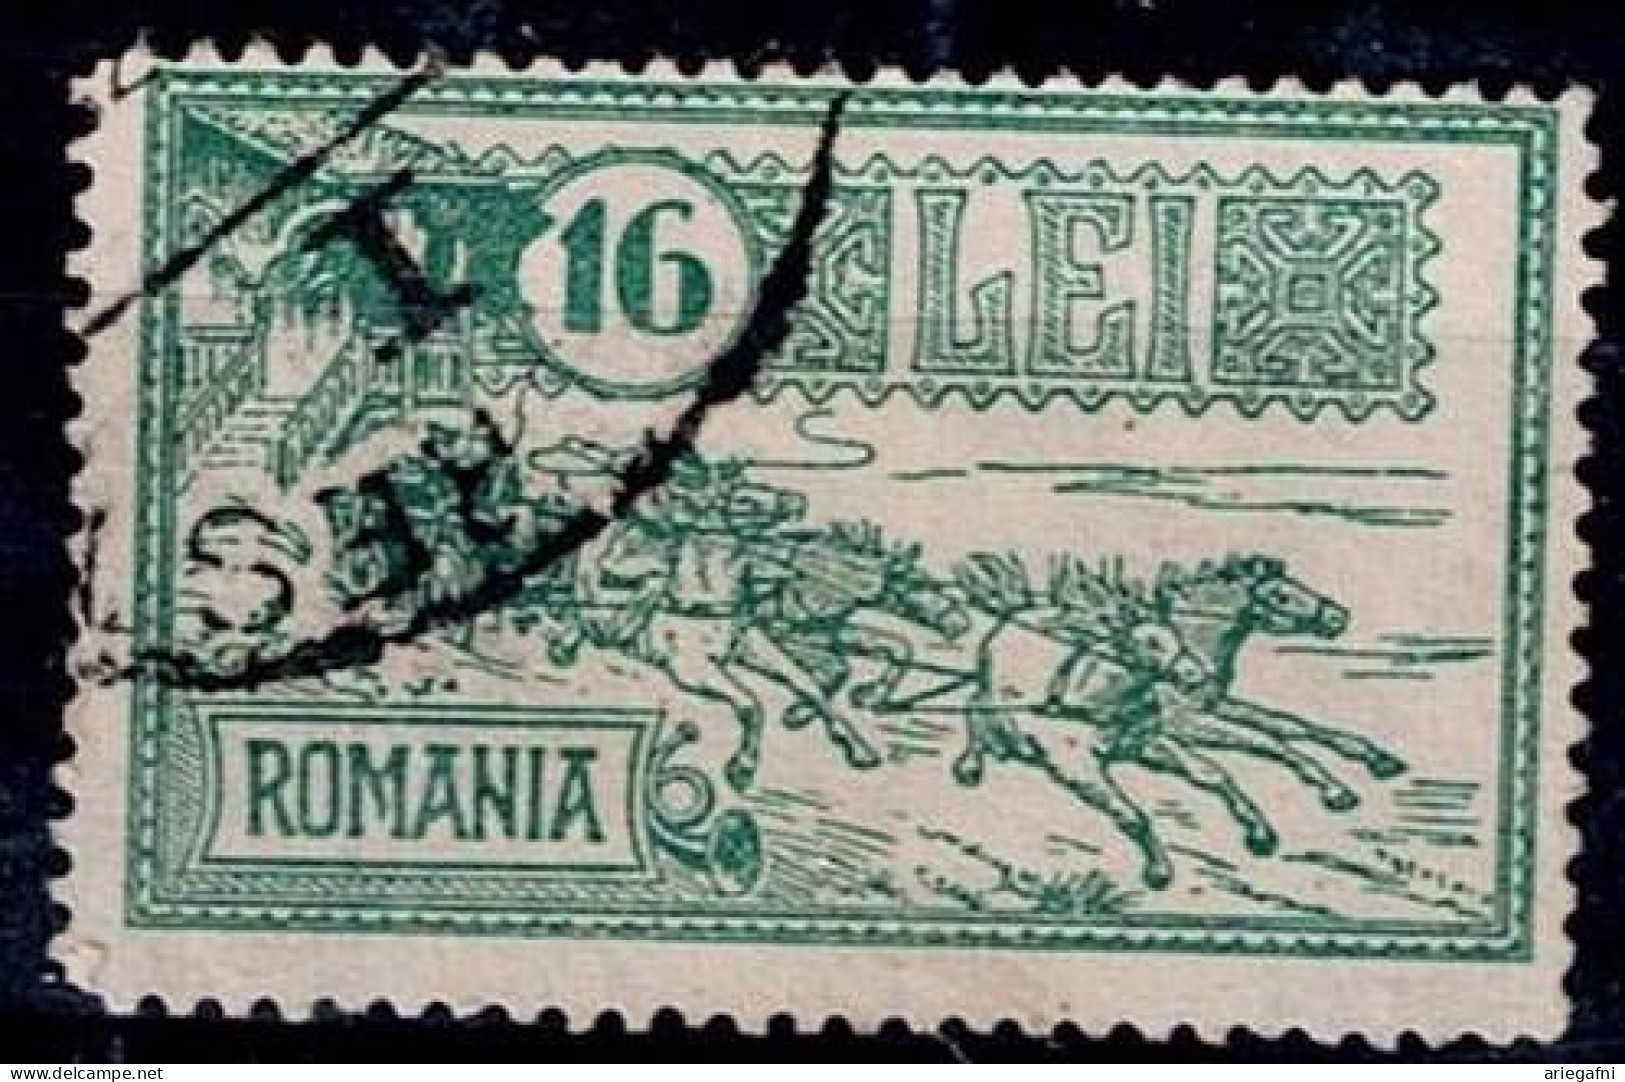 ROMANIA 1932 30 YEARS MAIN POST OFFICE, BUCHAREST MI No 457 USED VF!! - Used Stamps